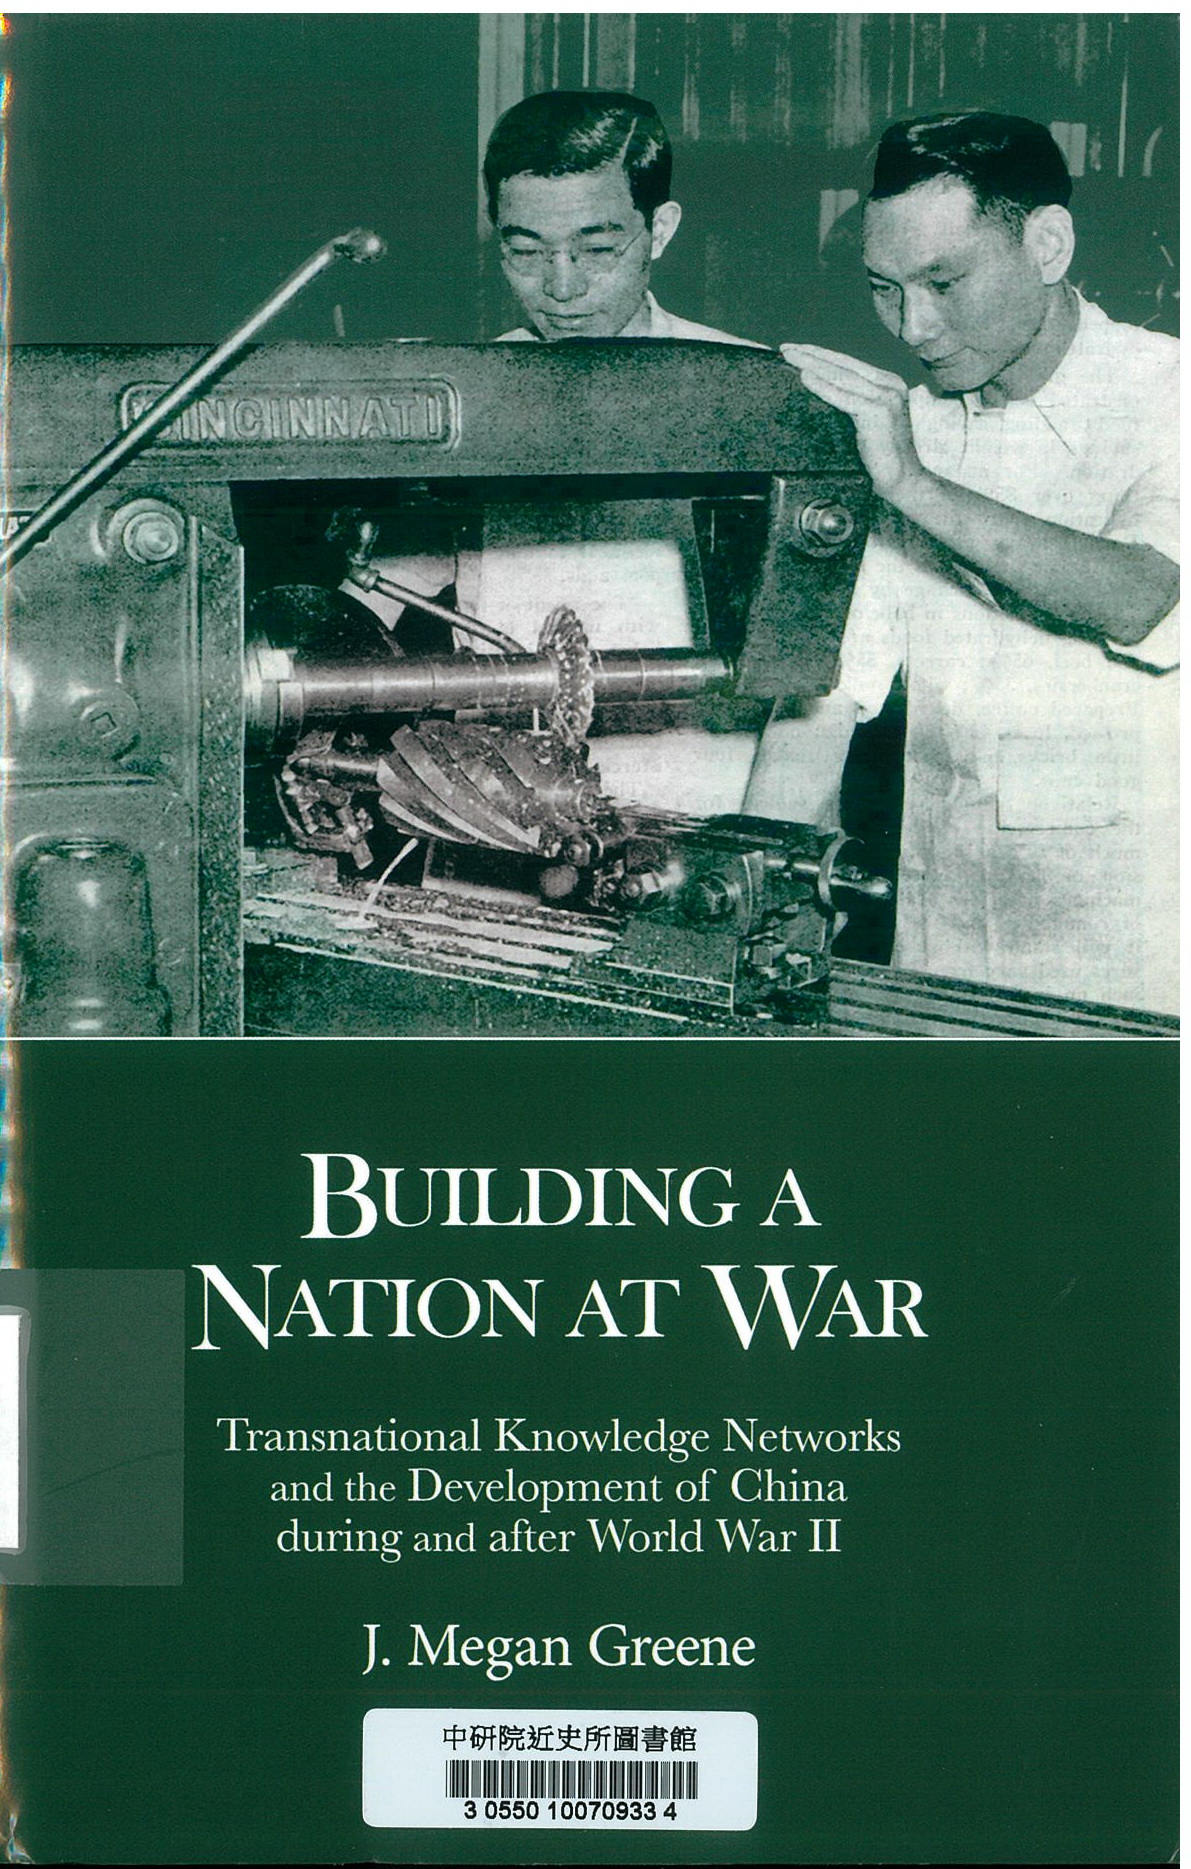 Building a nation at war : transnational knowledge networks and the development of China during and after World War II